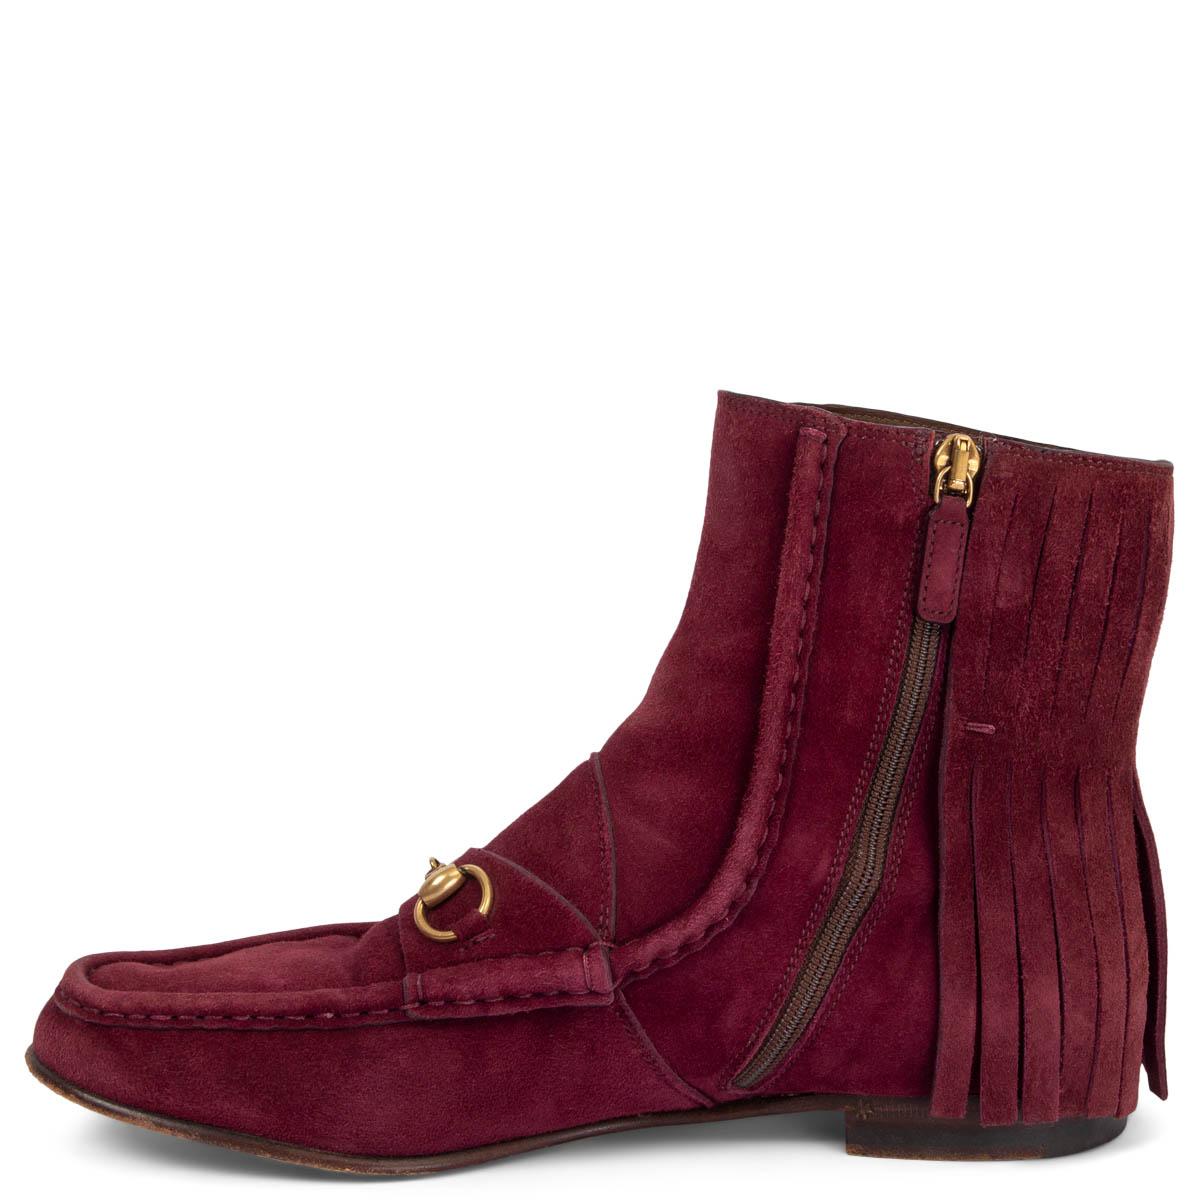 Red GUCCI burgundy suede 2014 FRINGED HORSEBIT LOAFER Boots Shoes 37.5 For Sale